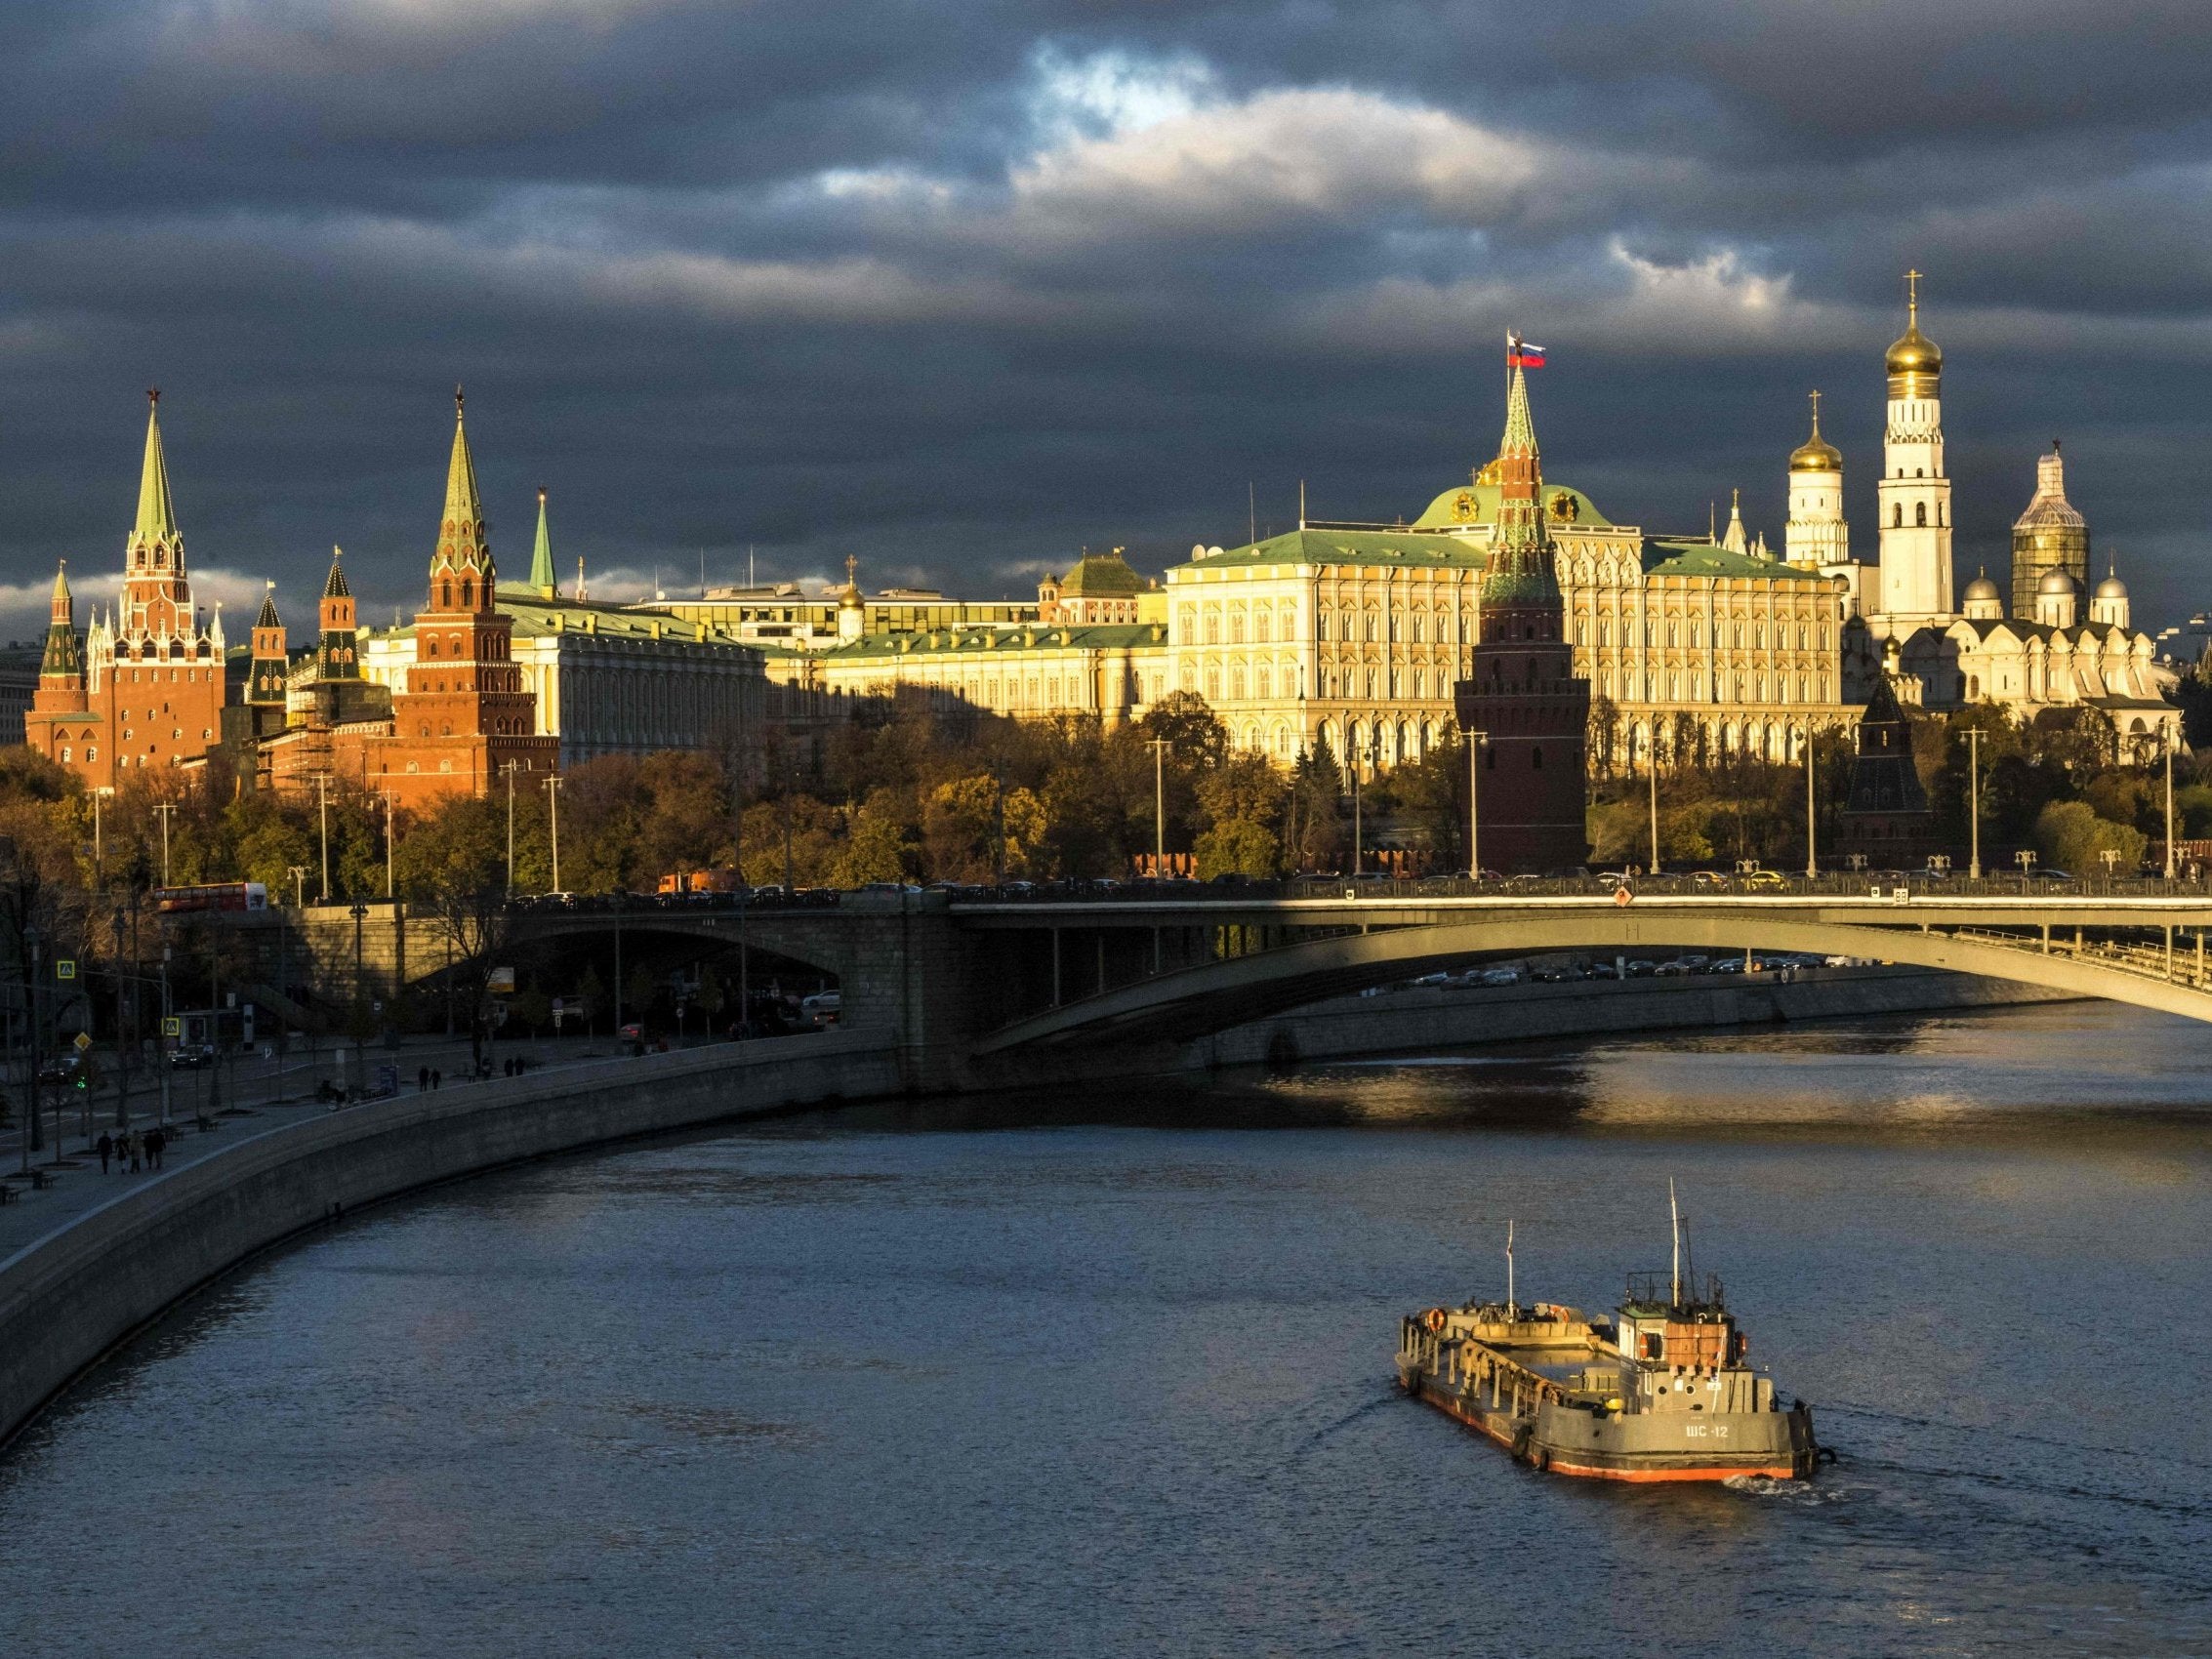 A US citizen has been arrested in Moscow on spy charges